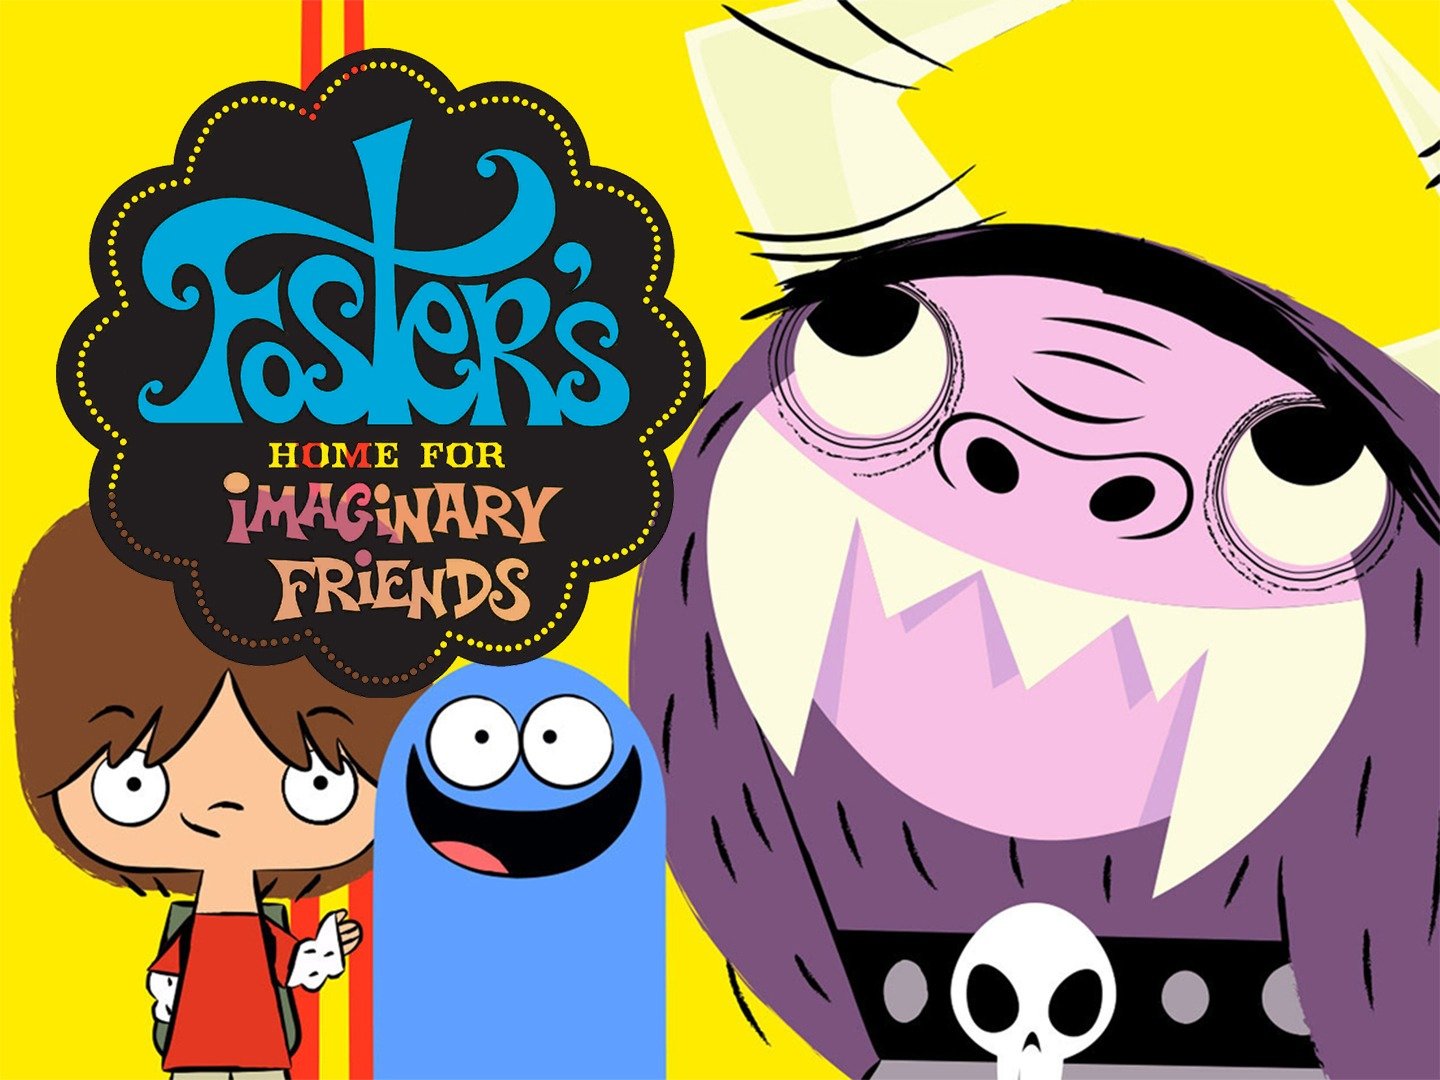 Fosters home for imaginary friends world wide wabbit